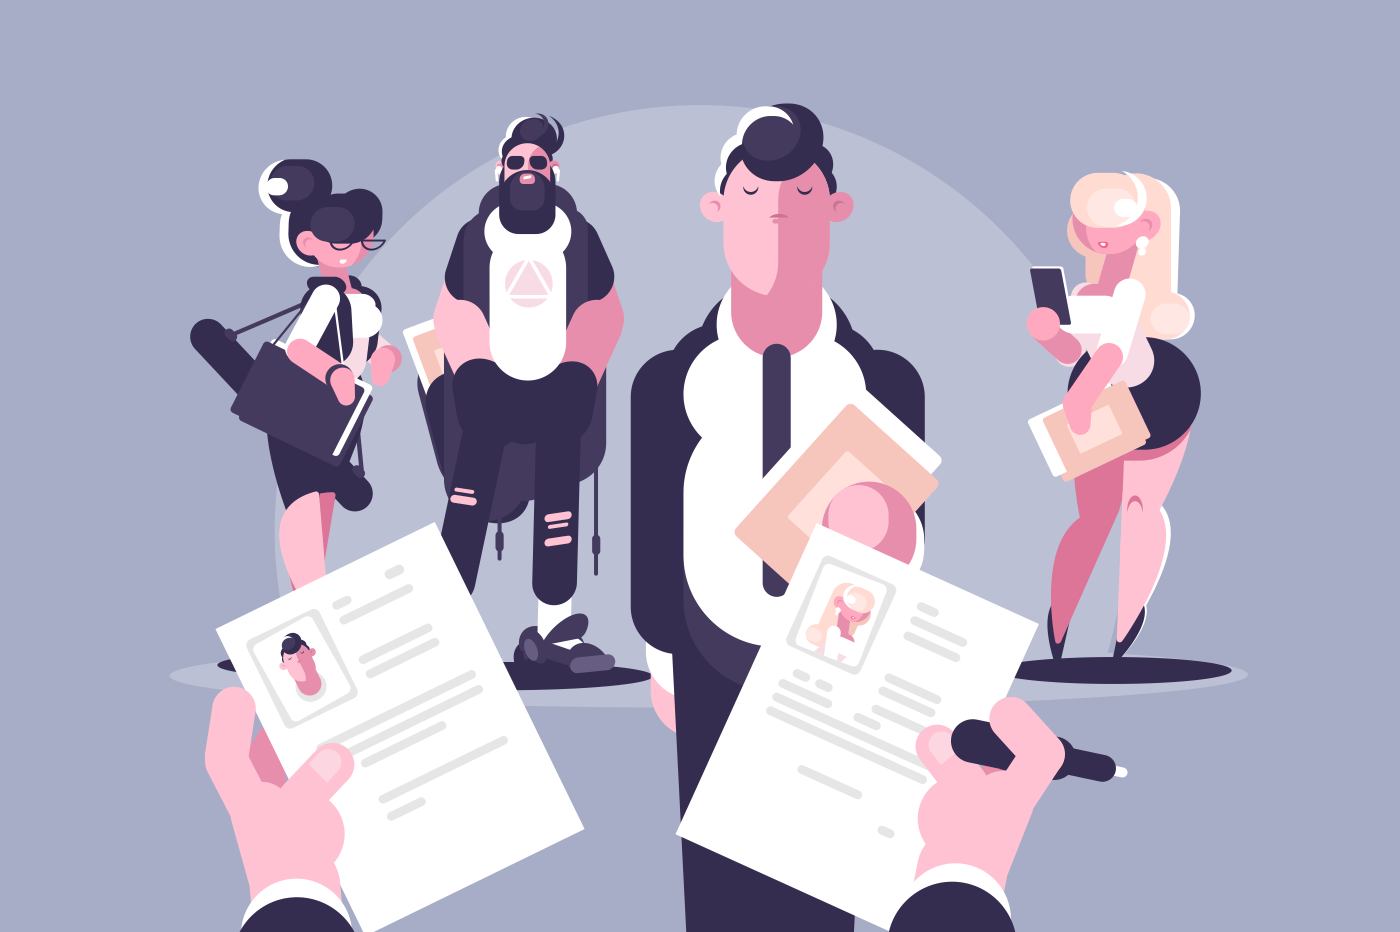 Election of candidates for vacancy. Concept recruitment with hr, choice between man and woman. Vector illustration.